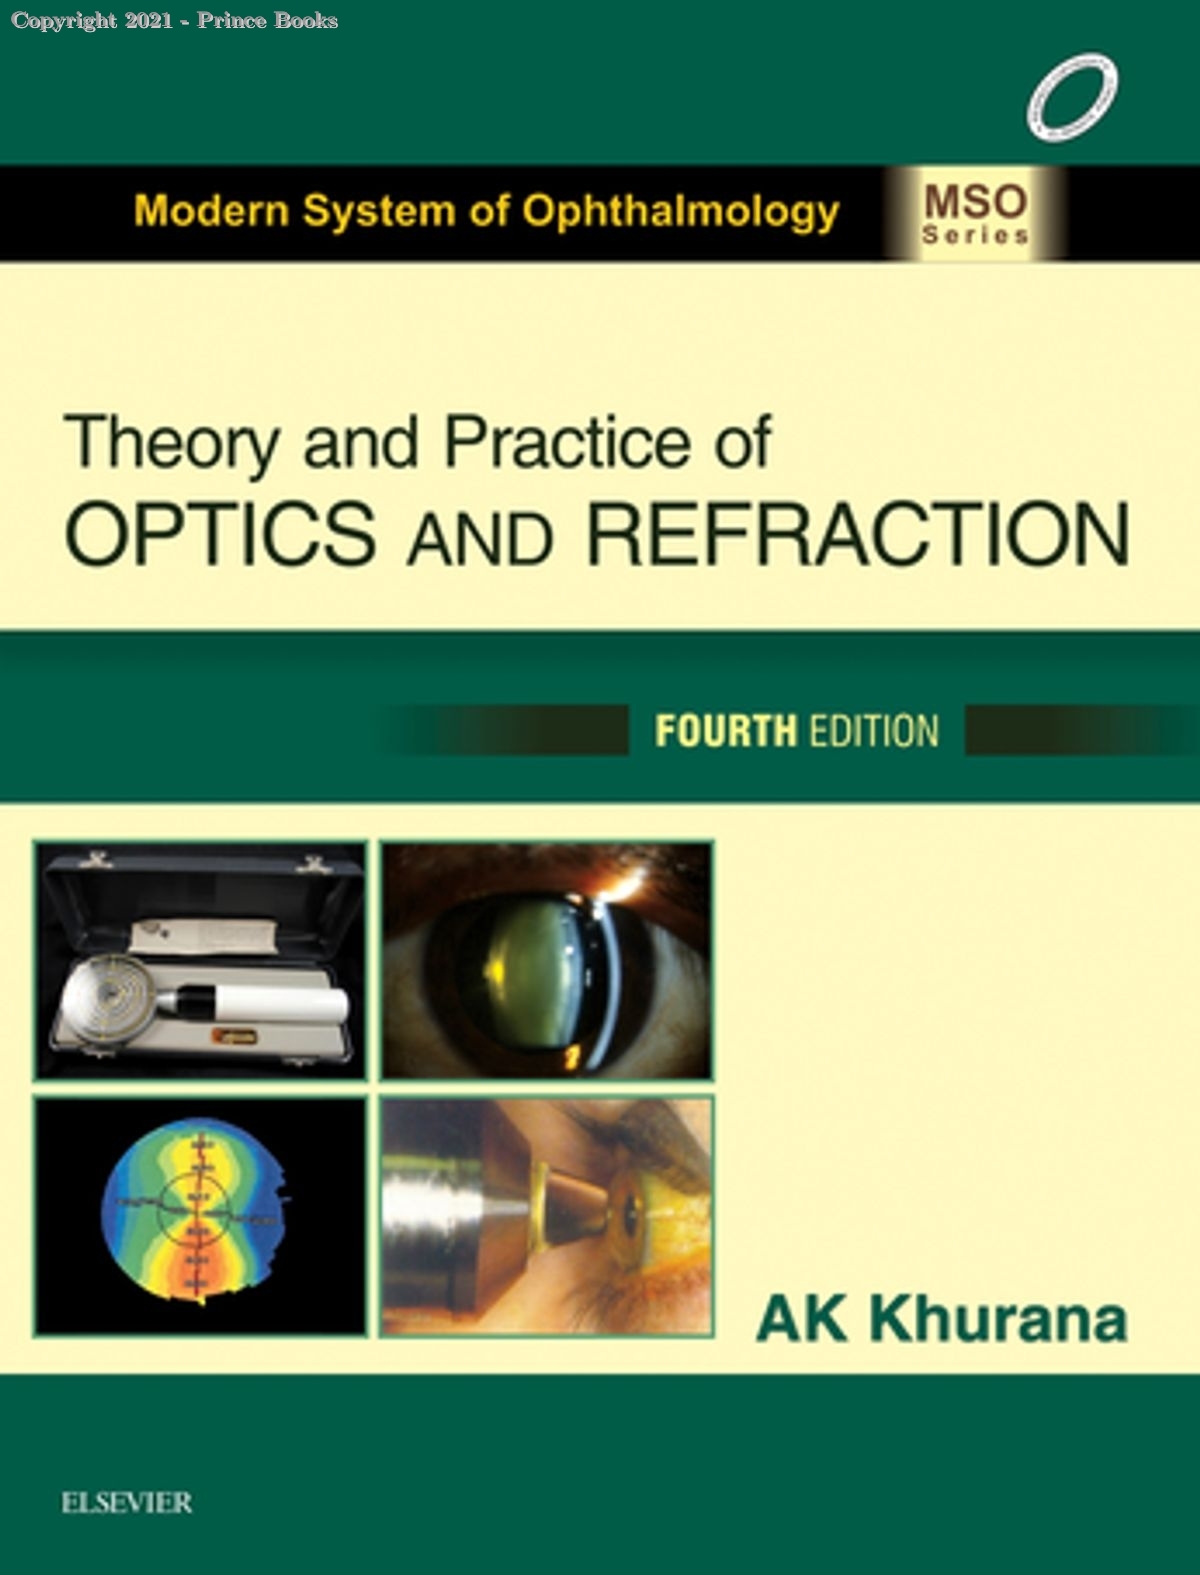 theory and practice of optics and refraction, 4e